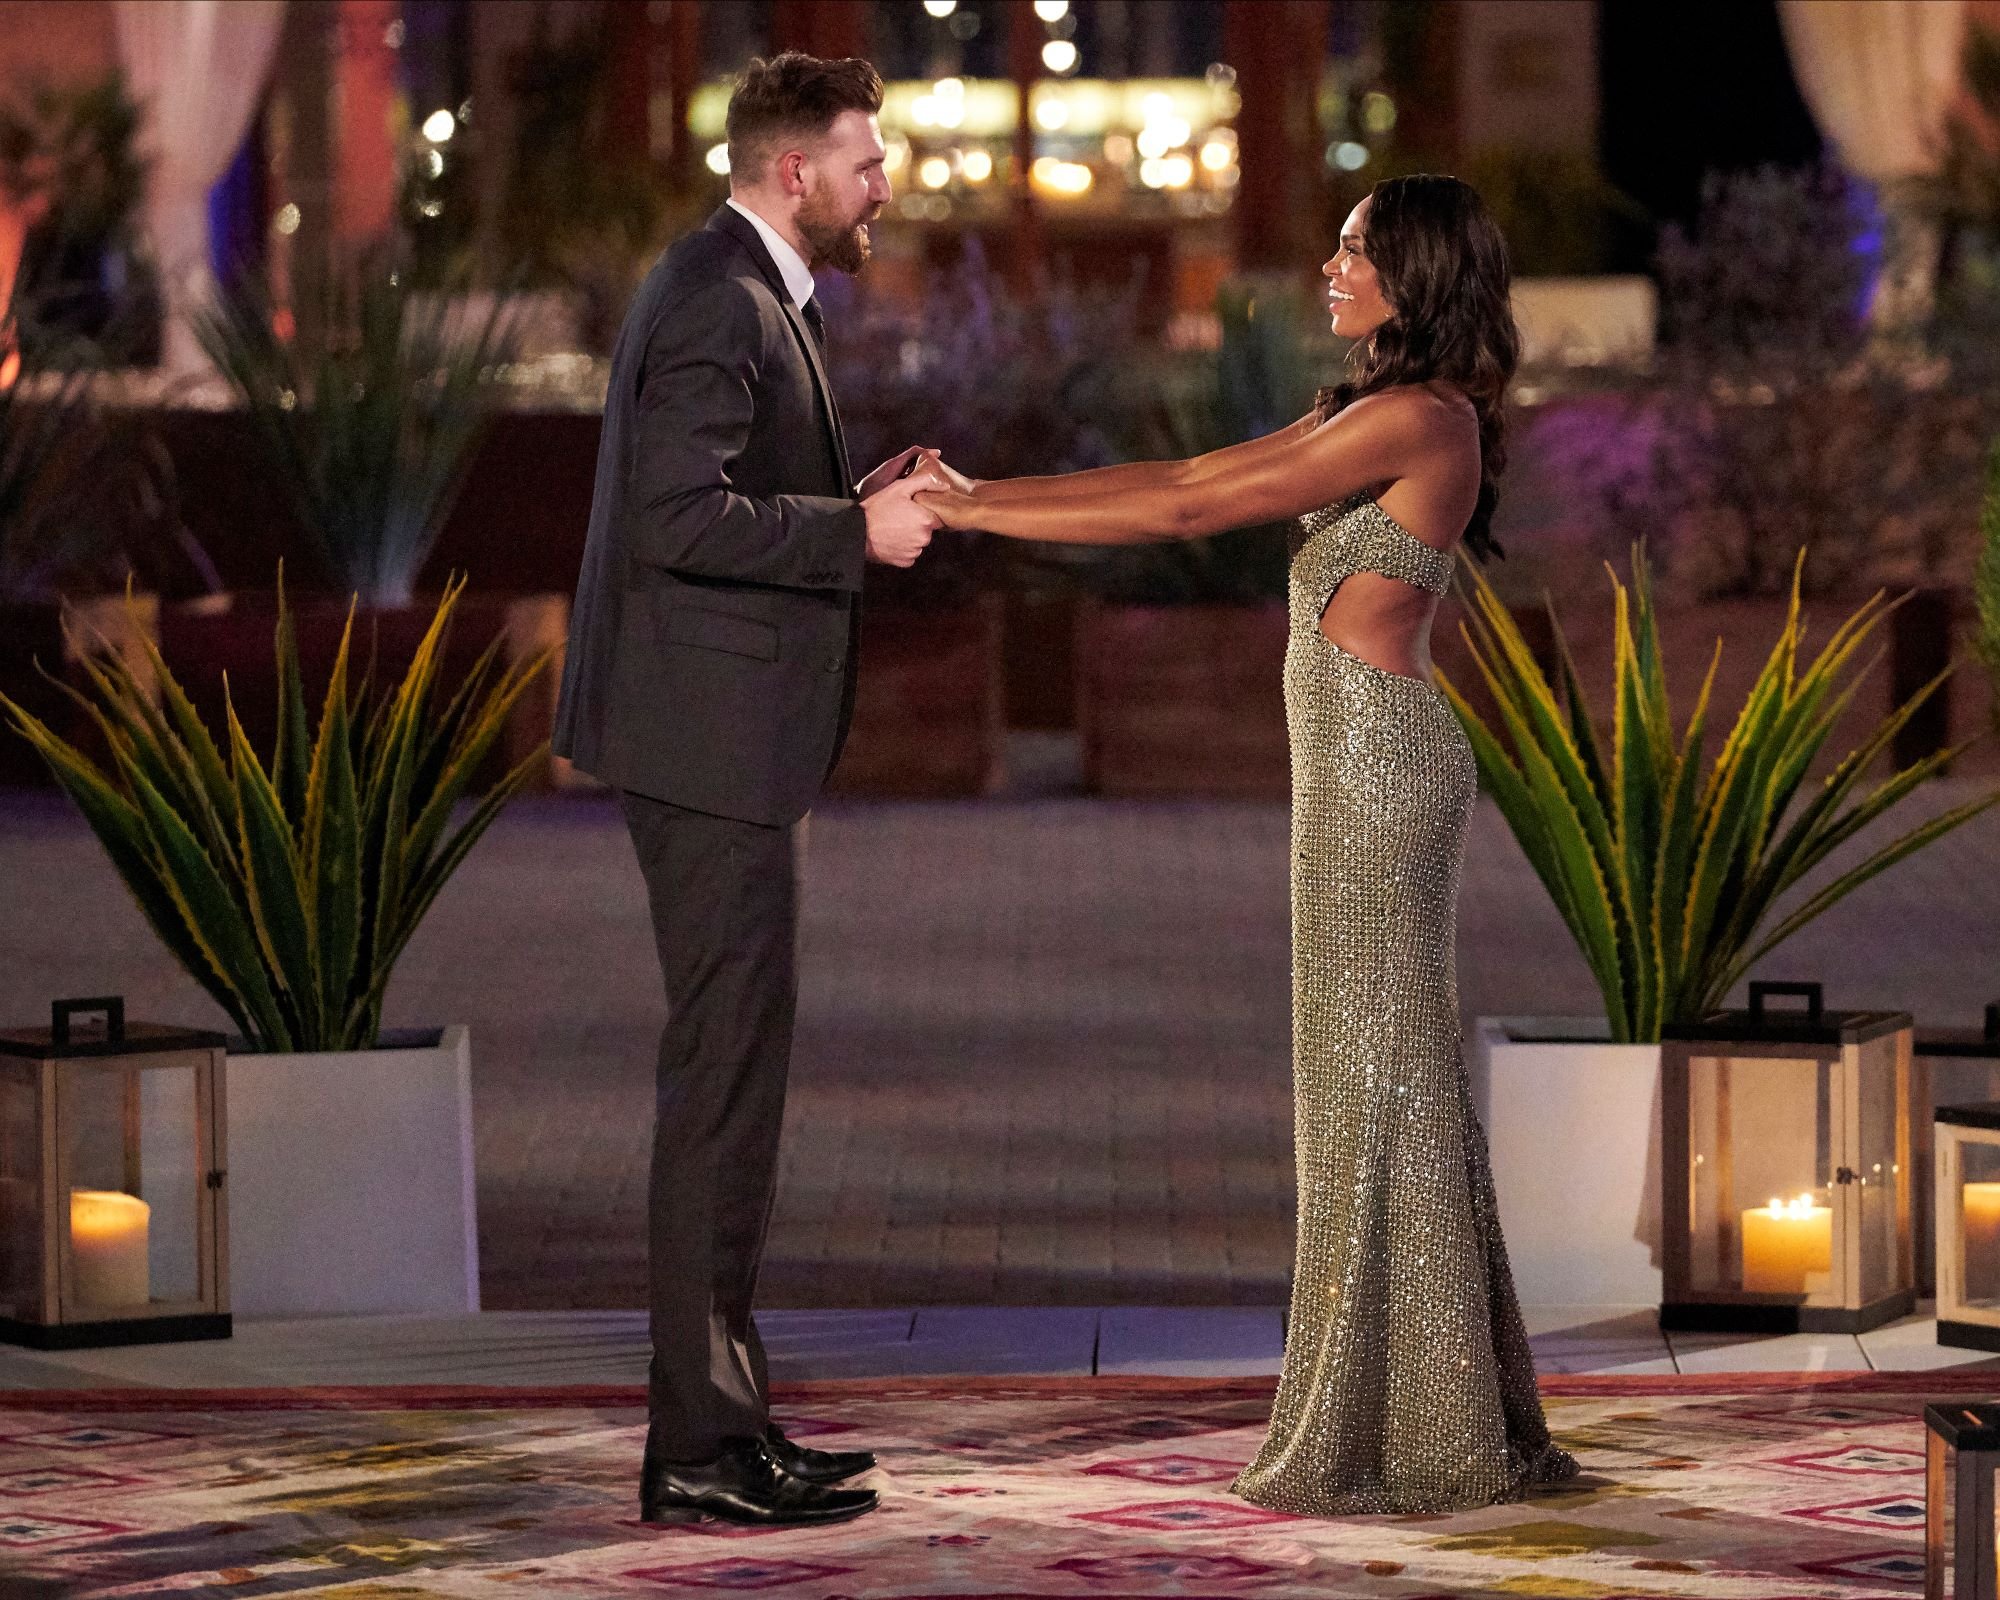 'The Bachelorette' star Michelle Young meets one of her contestants, Chris Gallant, for the first time. Chirs wears a black suit and black dress shoes. Michelle wears a muted green sparkly dress. They hold hands.